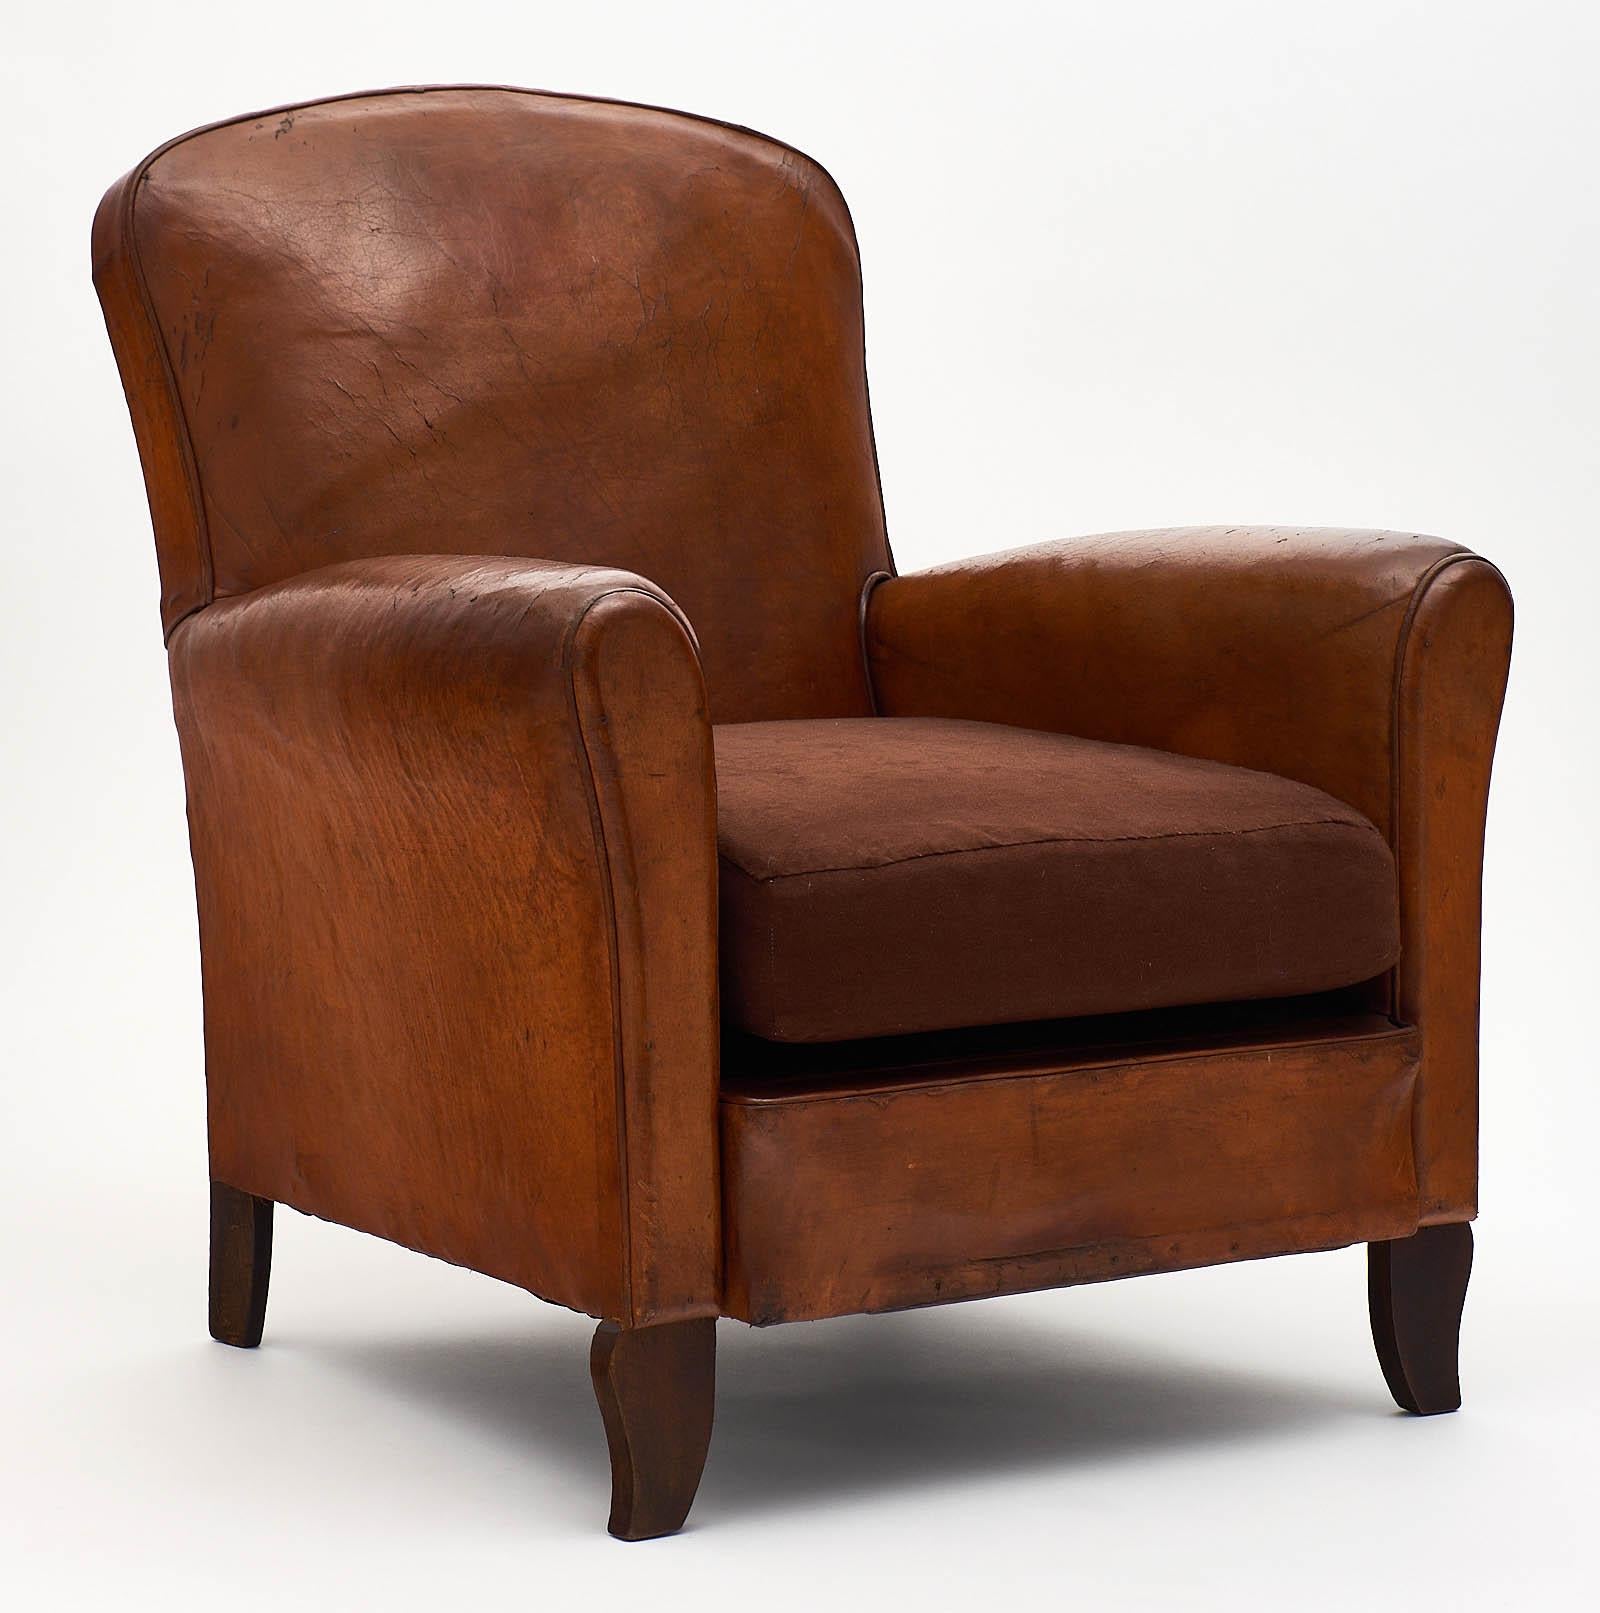 Mid-20th Century French Lambskin Club Chairs